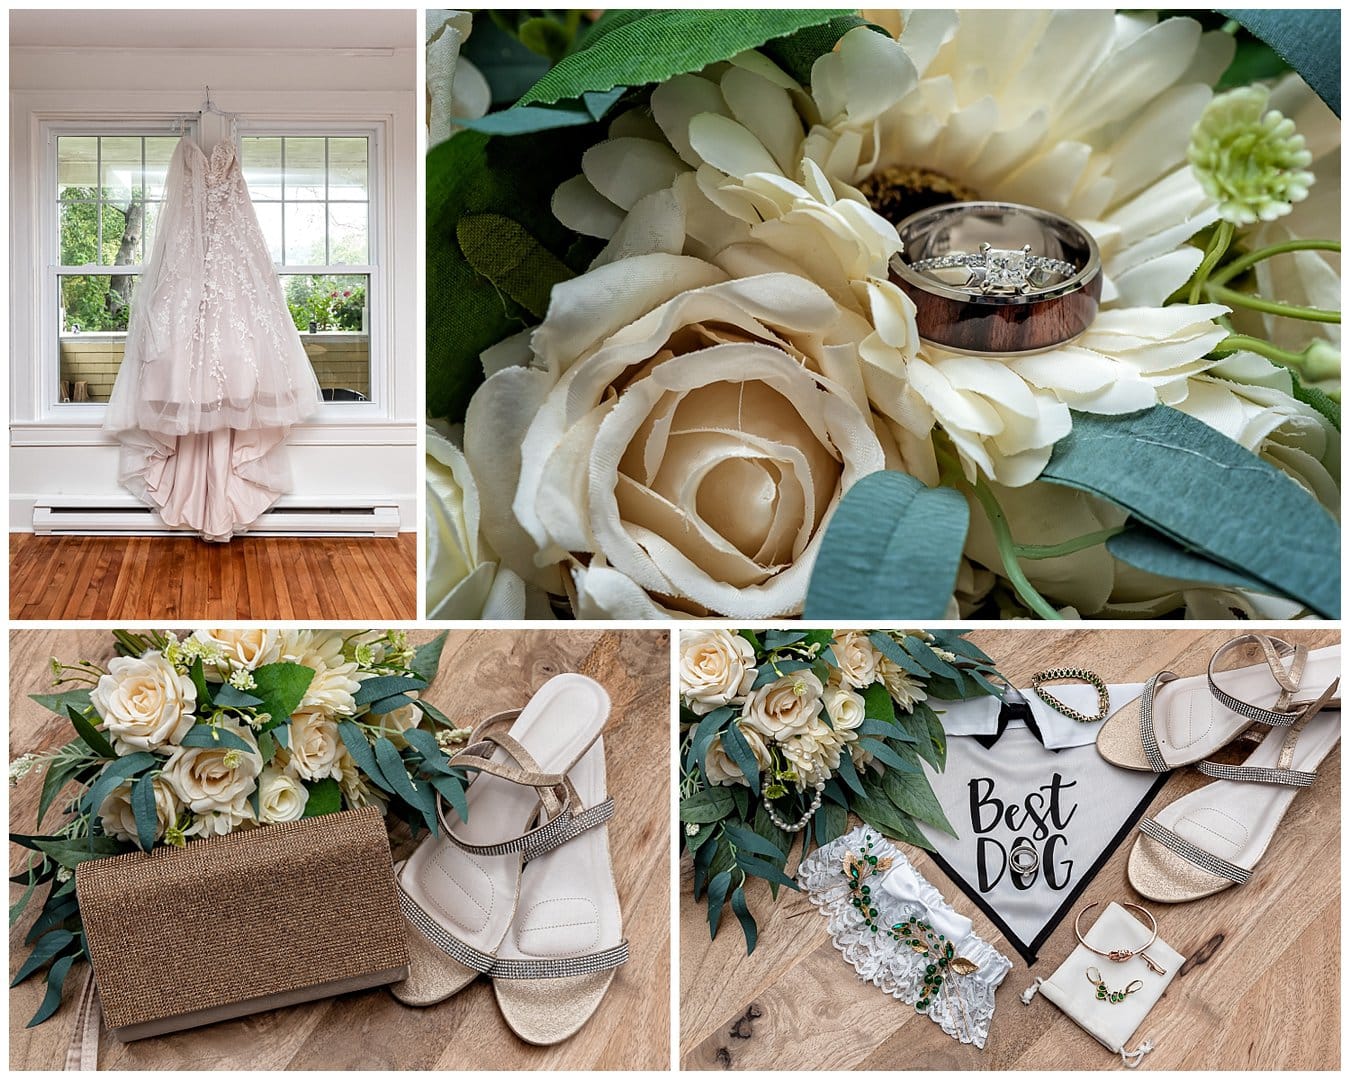 The bride's wedding dress, rings, bouquet, shoes and other accessories for her wedding day.